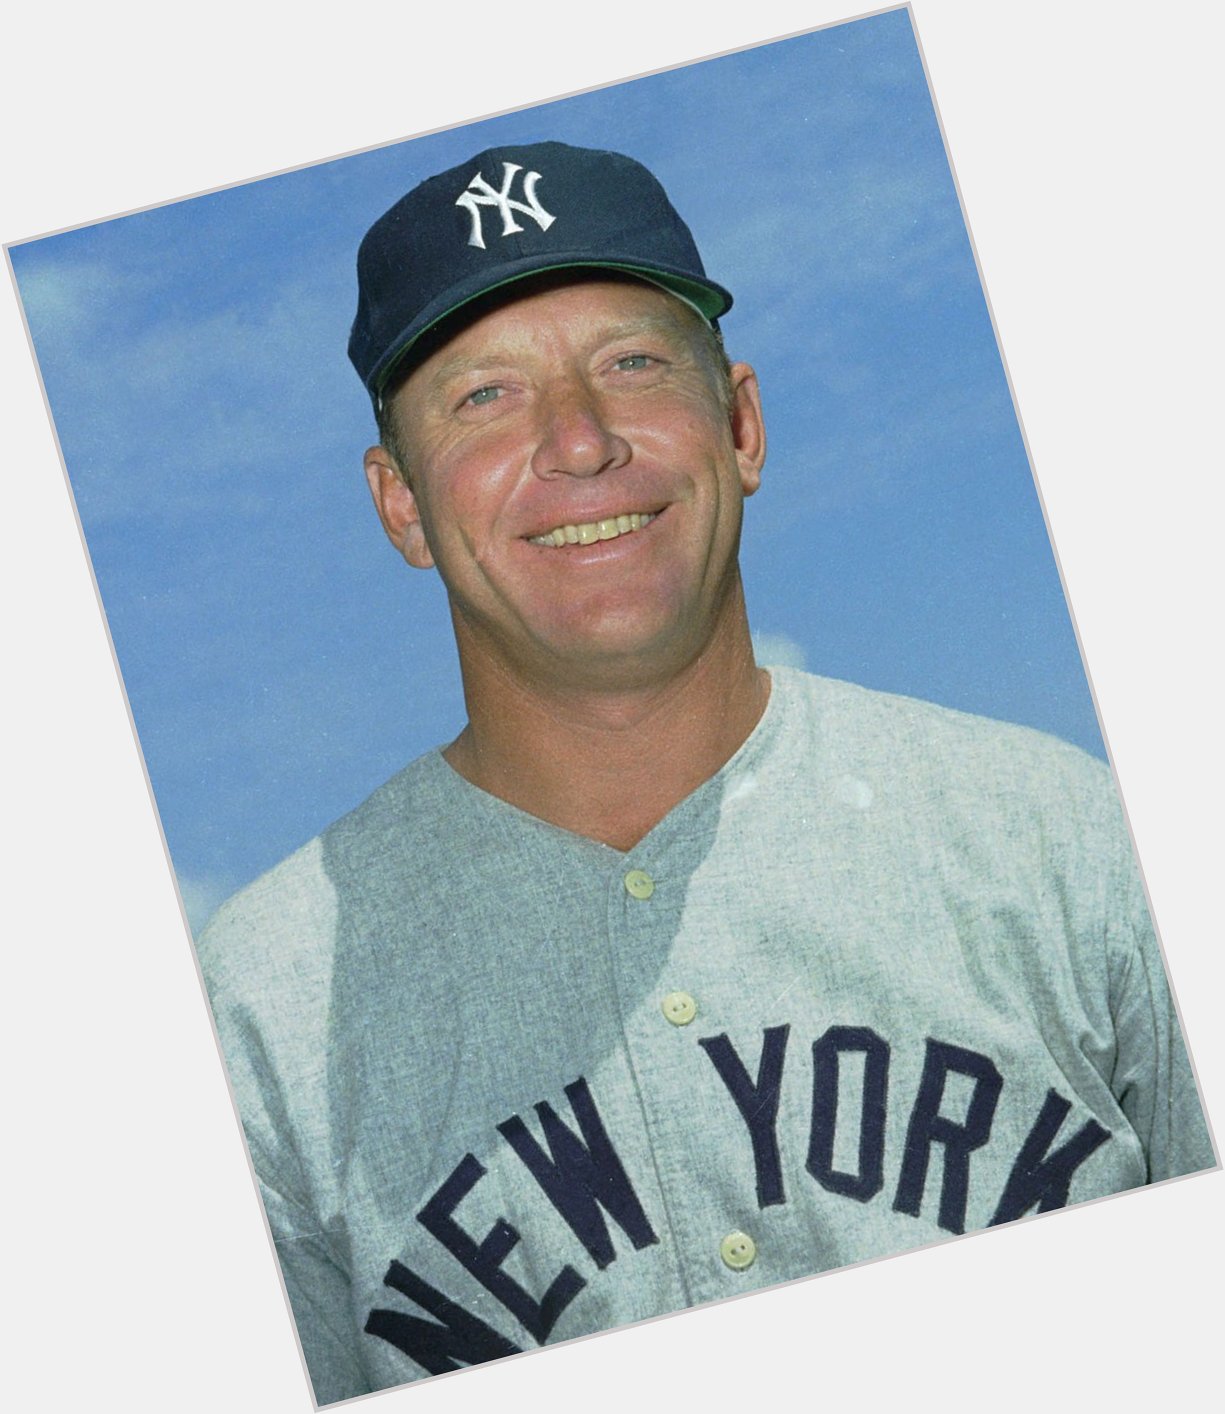 Happy birthday to Mickey Mantle! The baseball hall of famer and New York Yankees legend was born in 1931. 